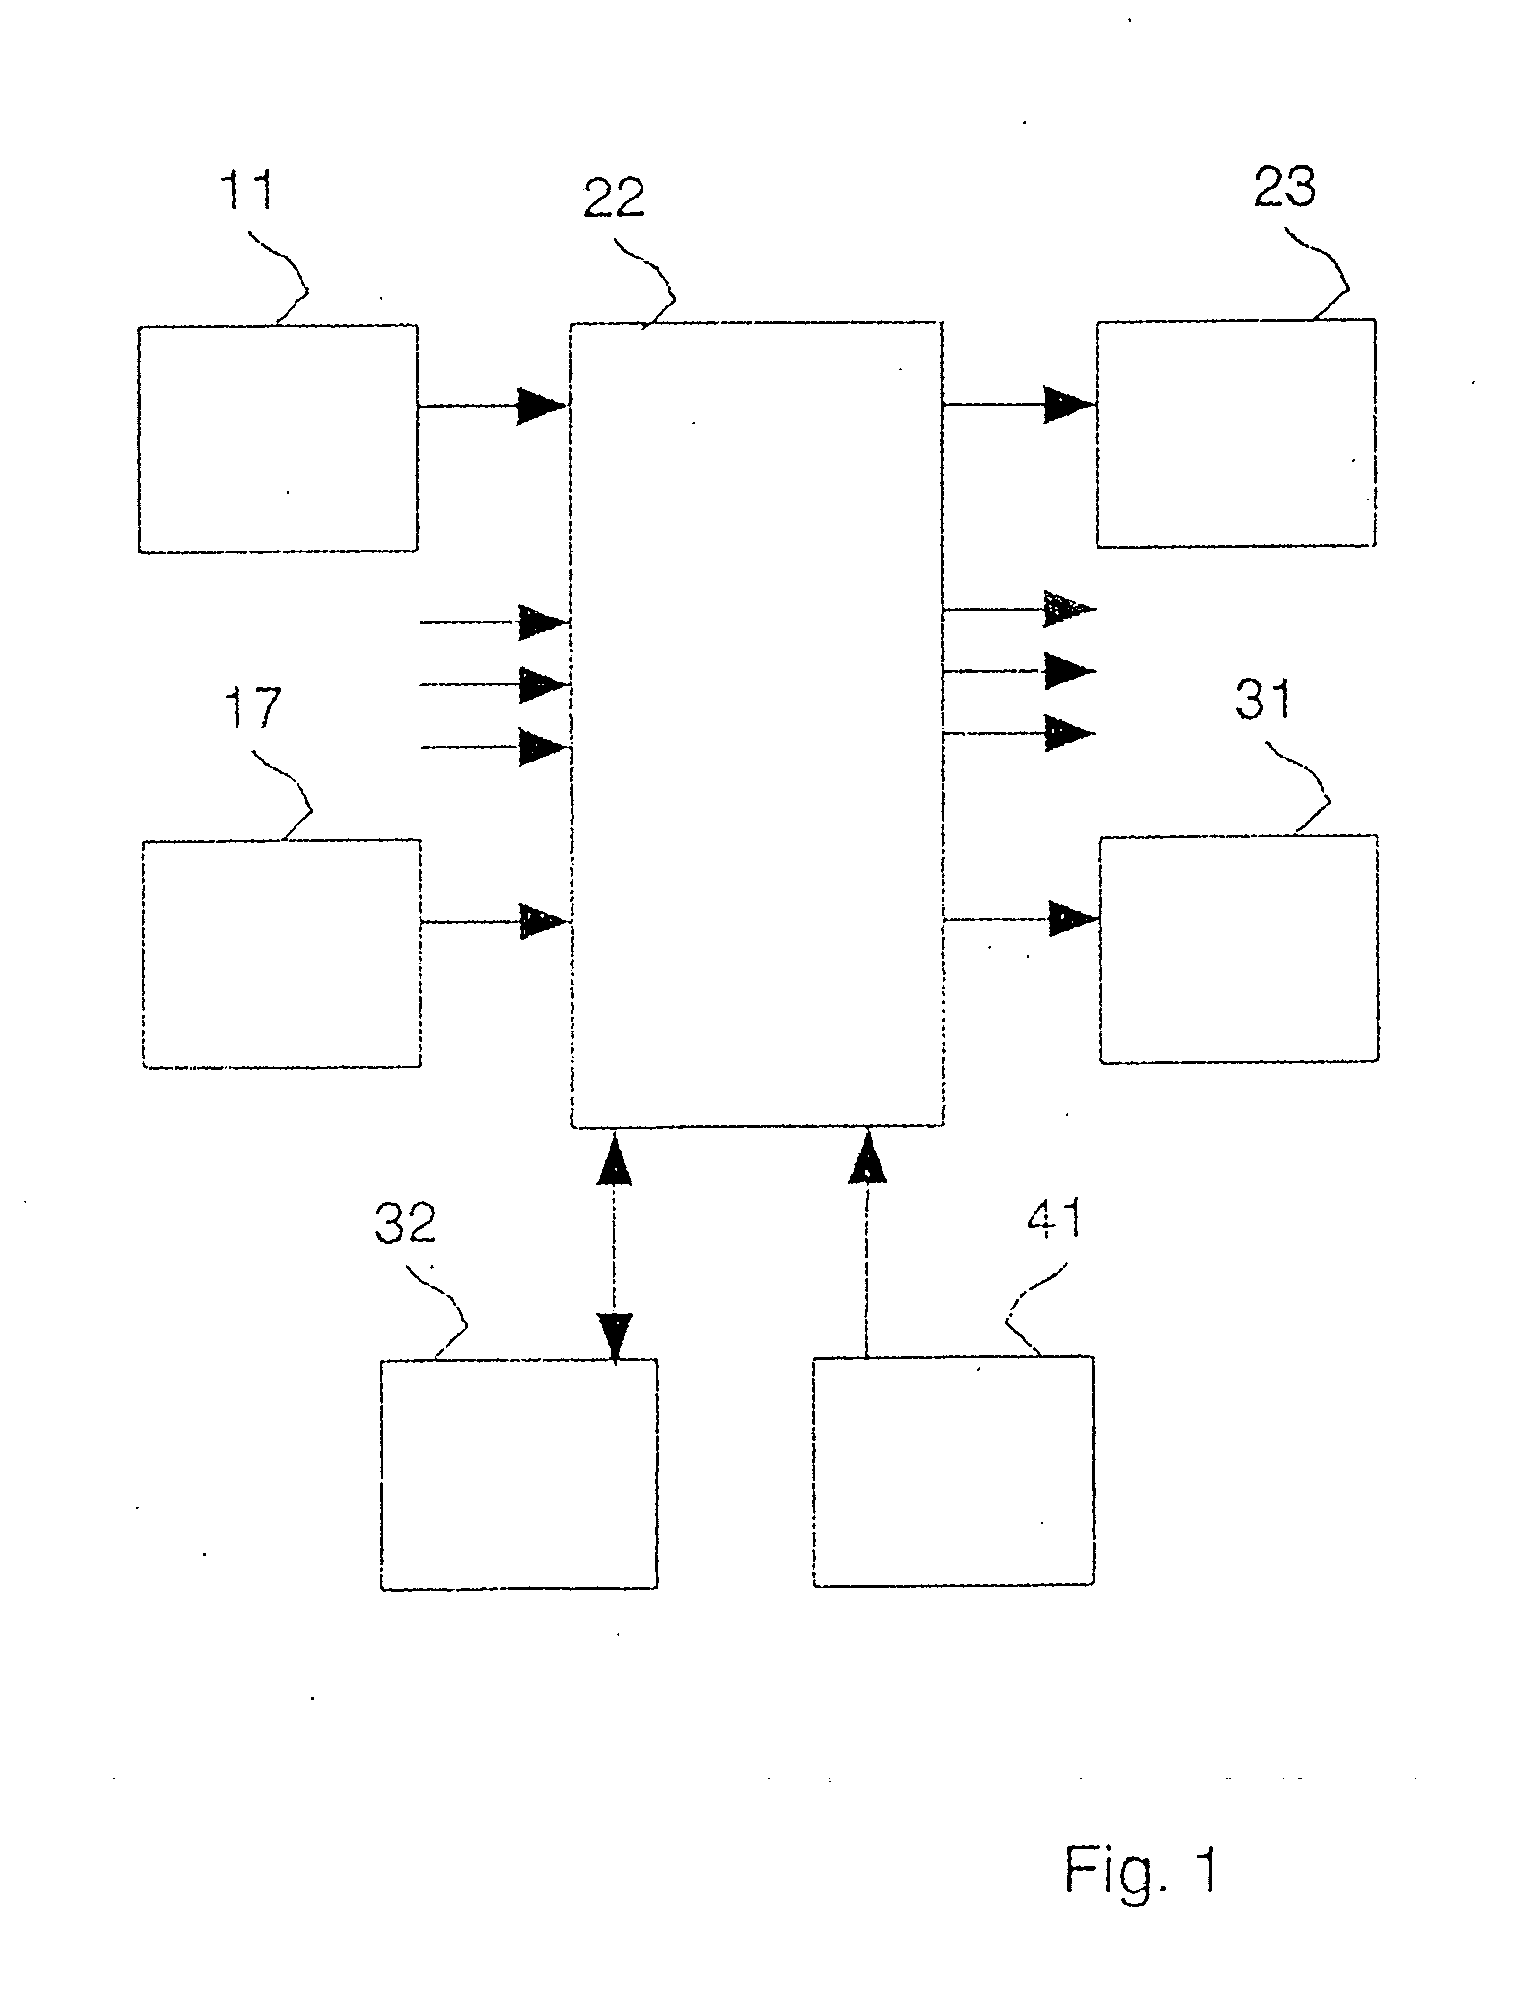 Multi-channel and multi dimensional system and method